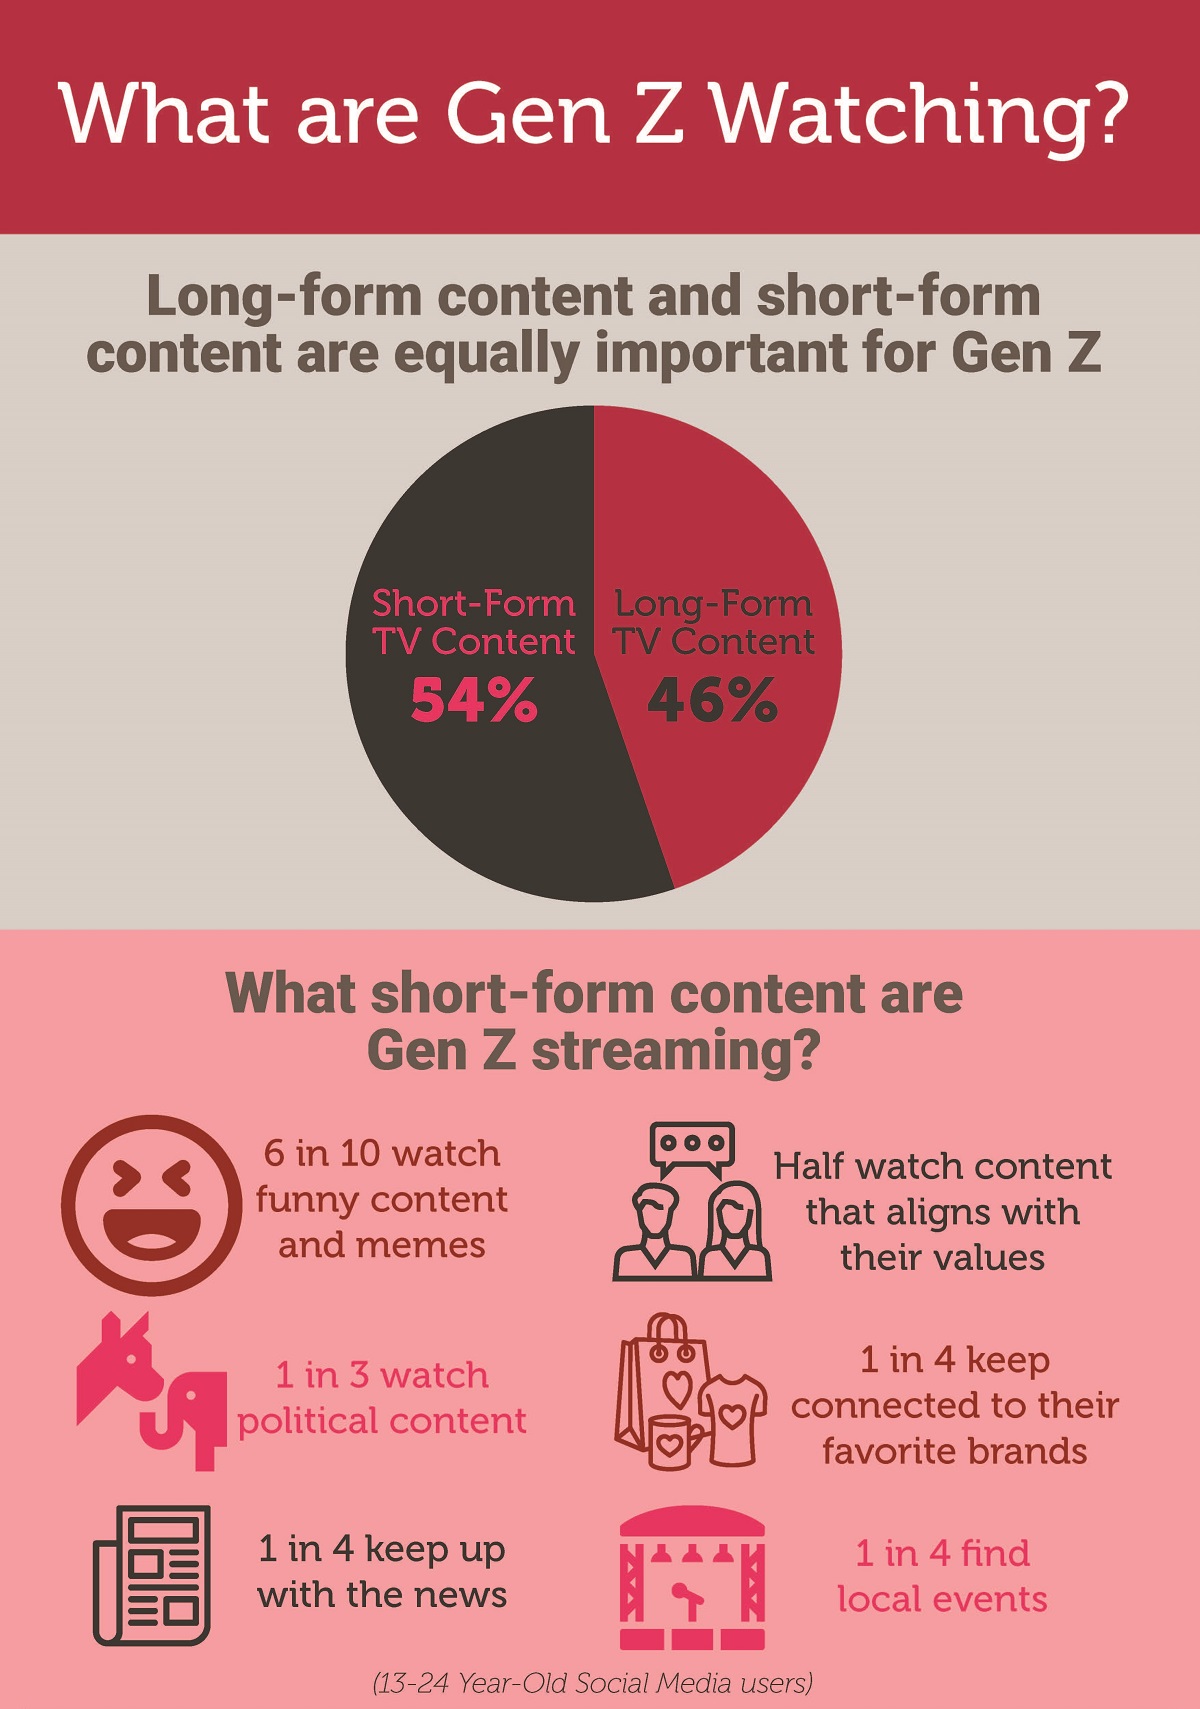 The “State of Gen Z 2021” report shows that longform and shortform content are equally important for Gen Z. Cr: Horowitz Research